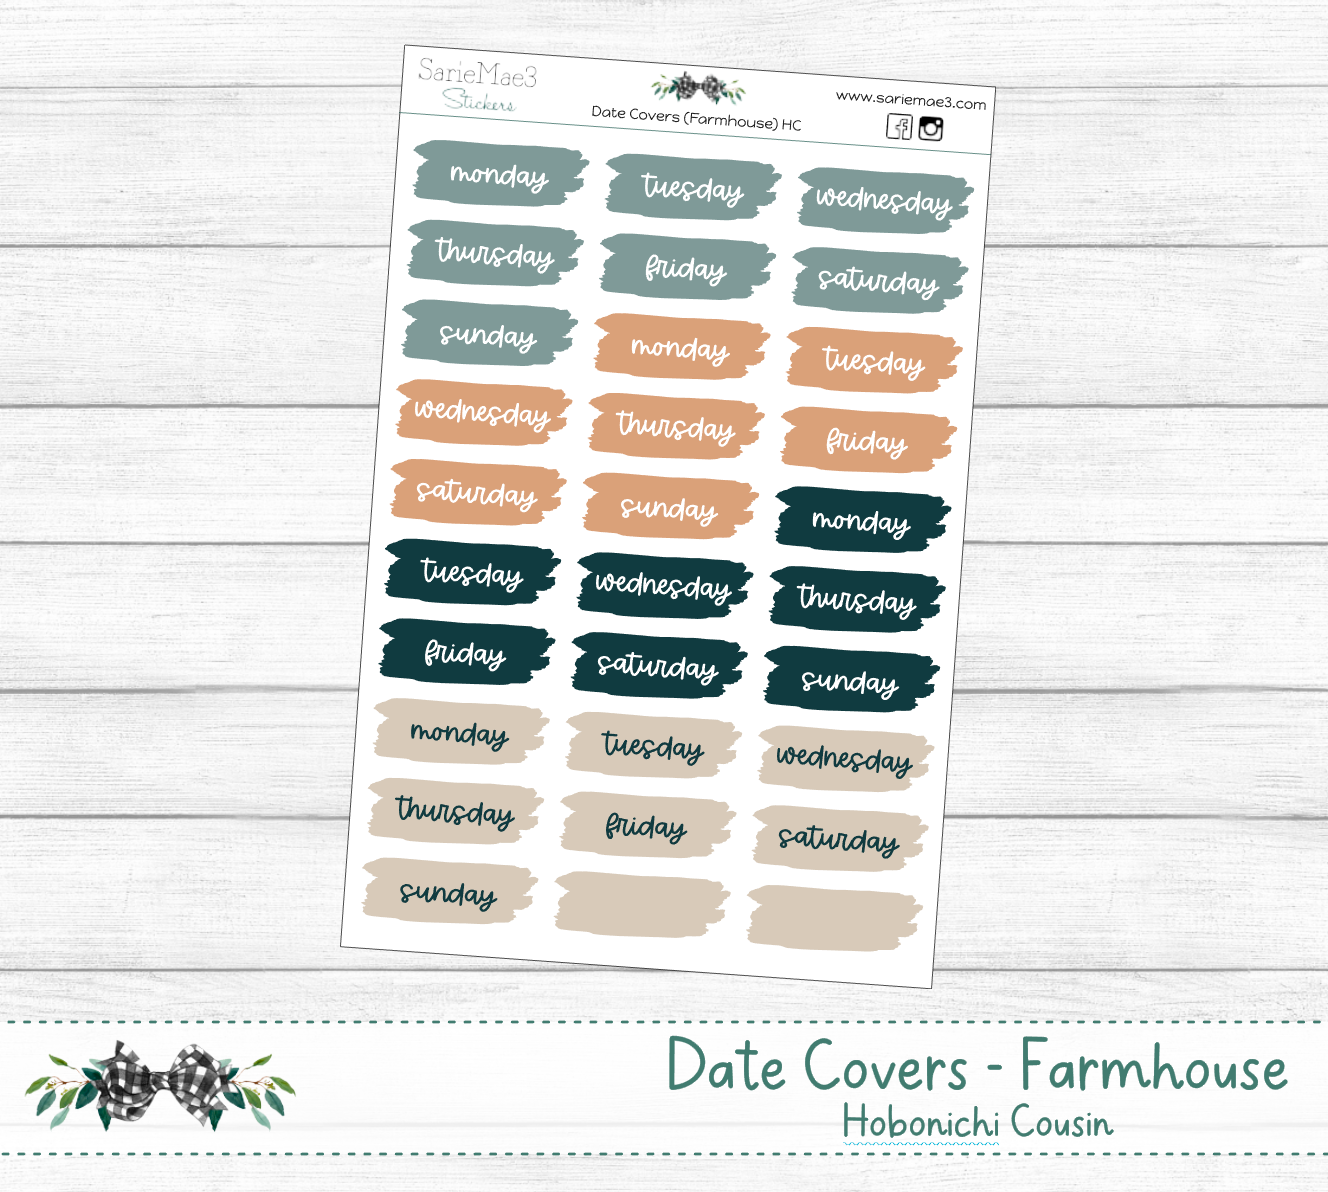 Date Covers (Farmhouse) Hobo Cousin